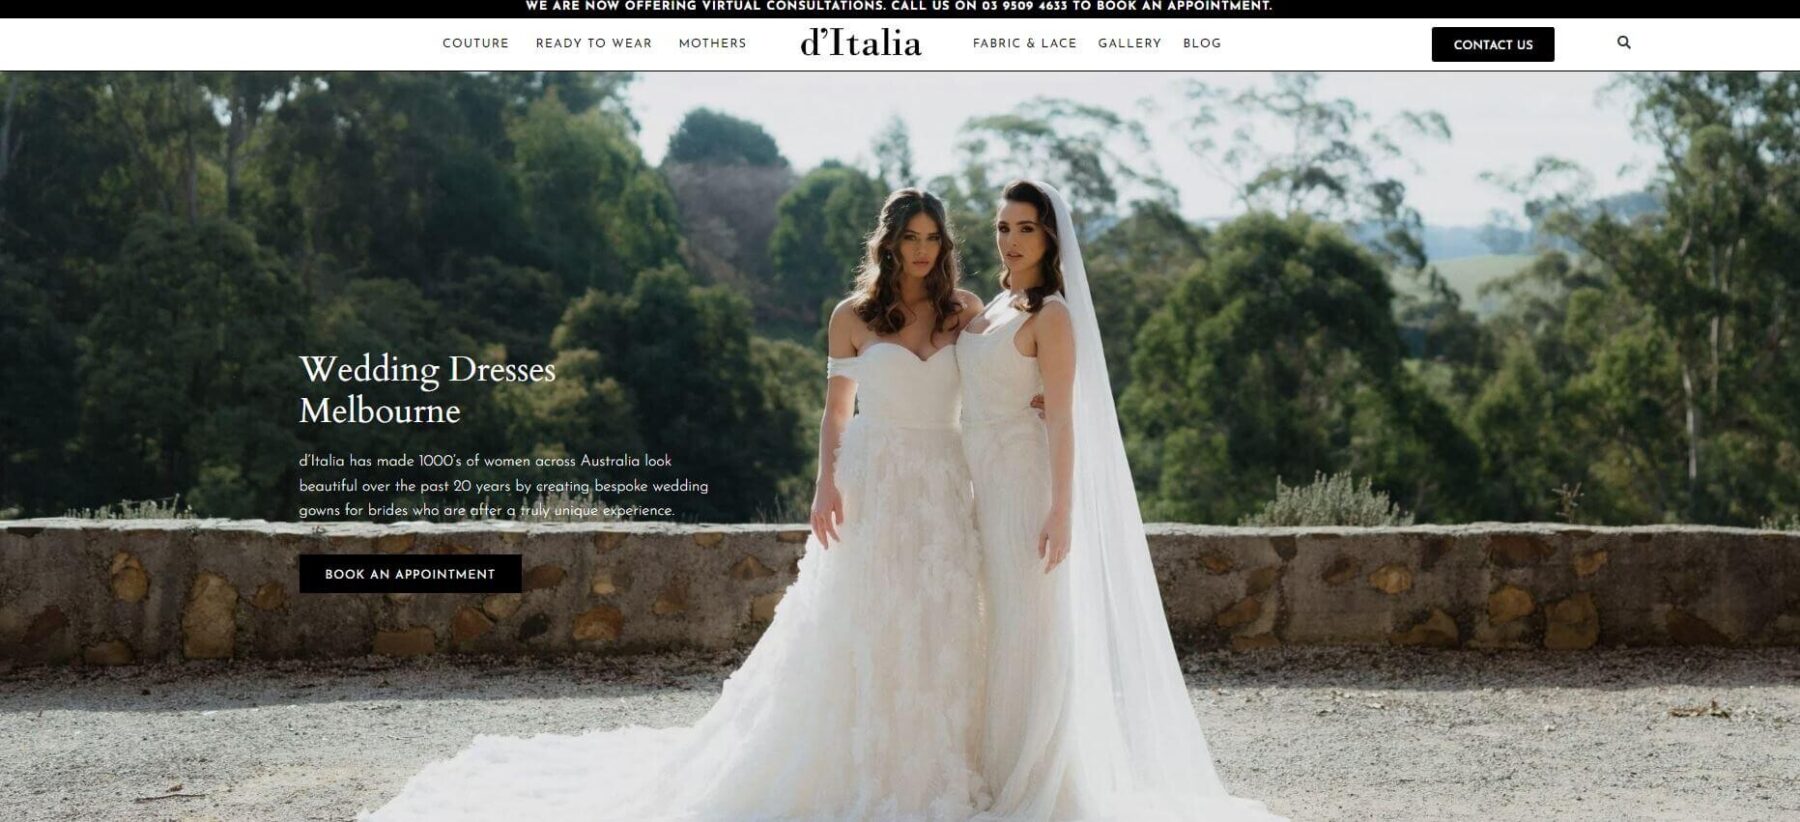 Top 30 Wedding Dress Designers in Melbourne, Victoria [2022]  by Wild Romantic Photography Melbourne